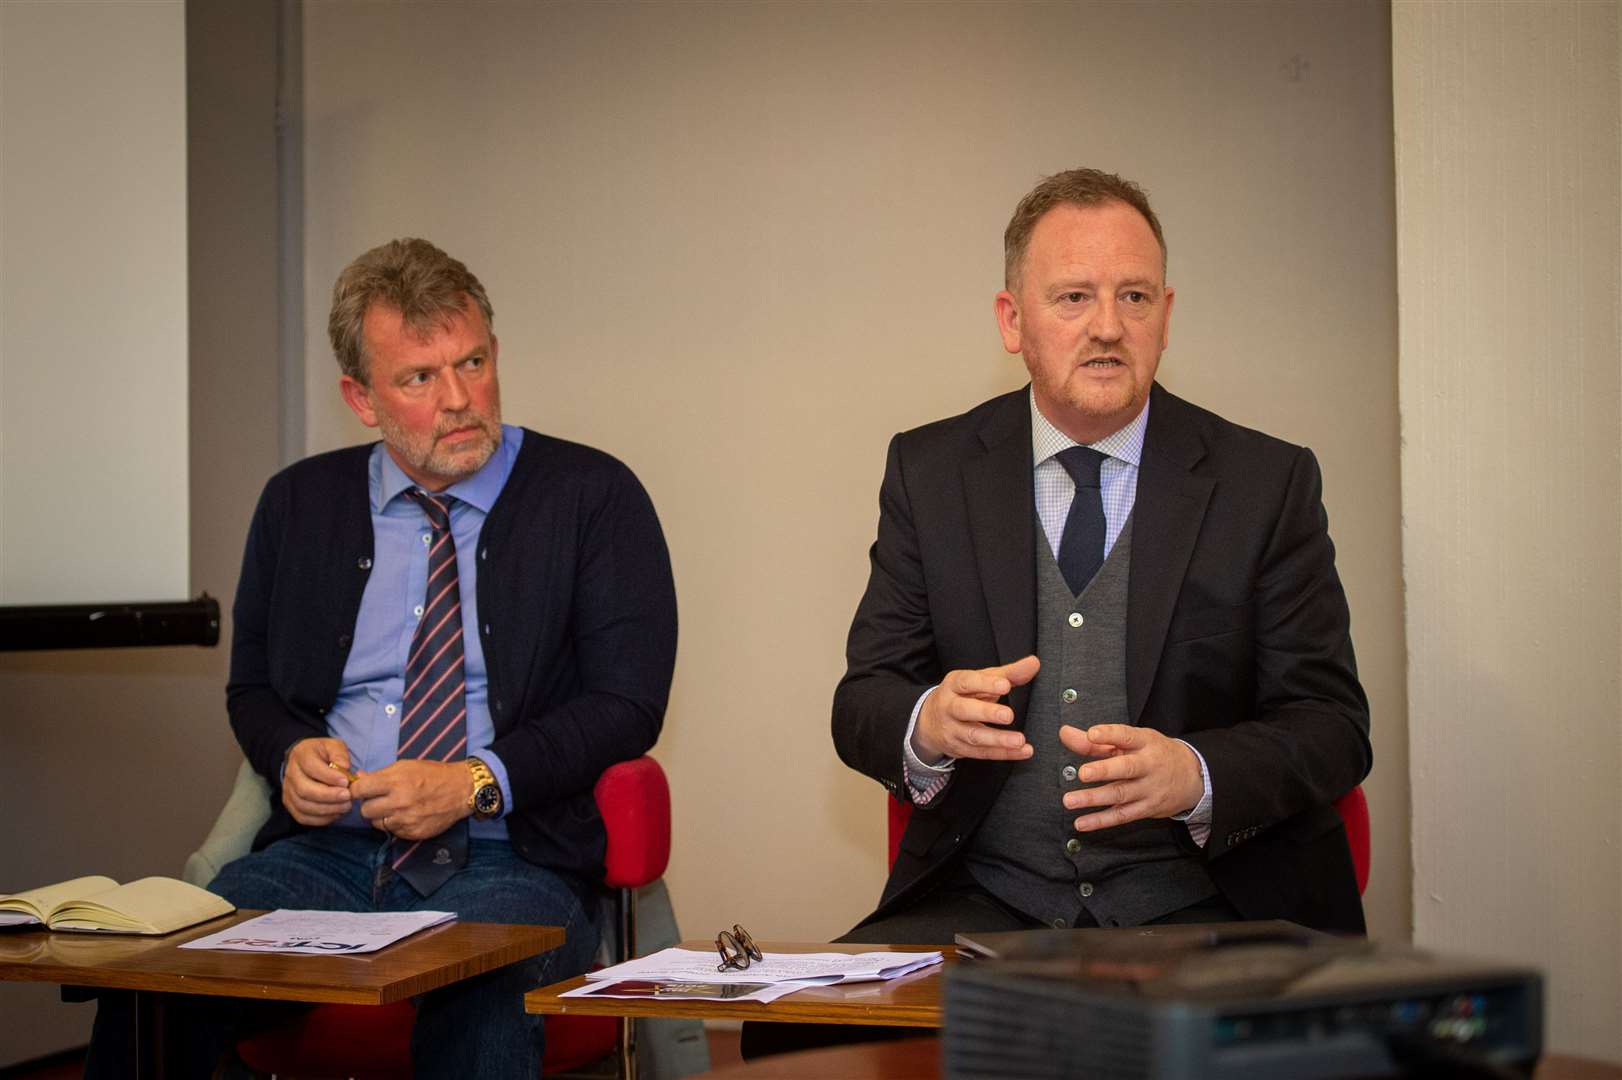 Chairman Ross Morrison and chief executive officer Scot Gardiner speaking at a public meeting in October.